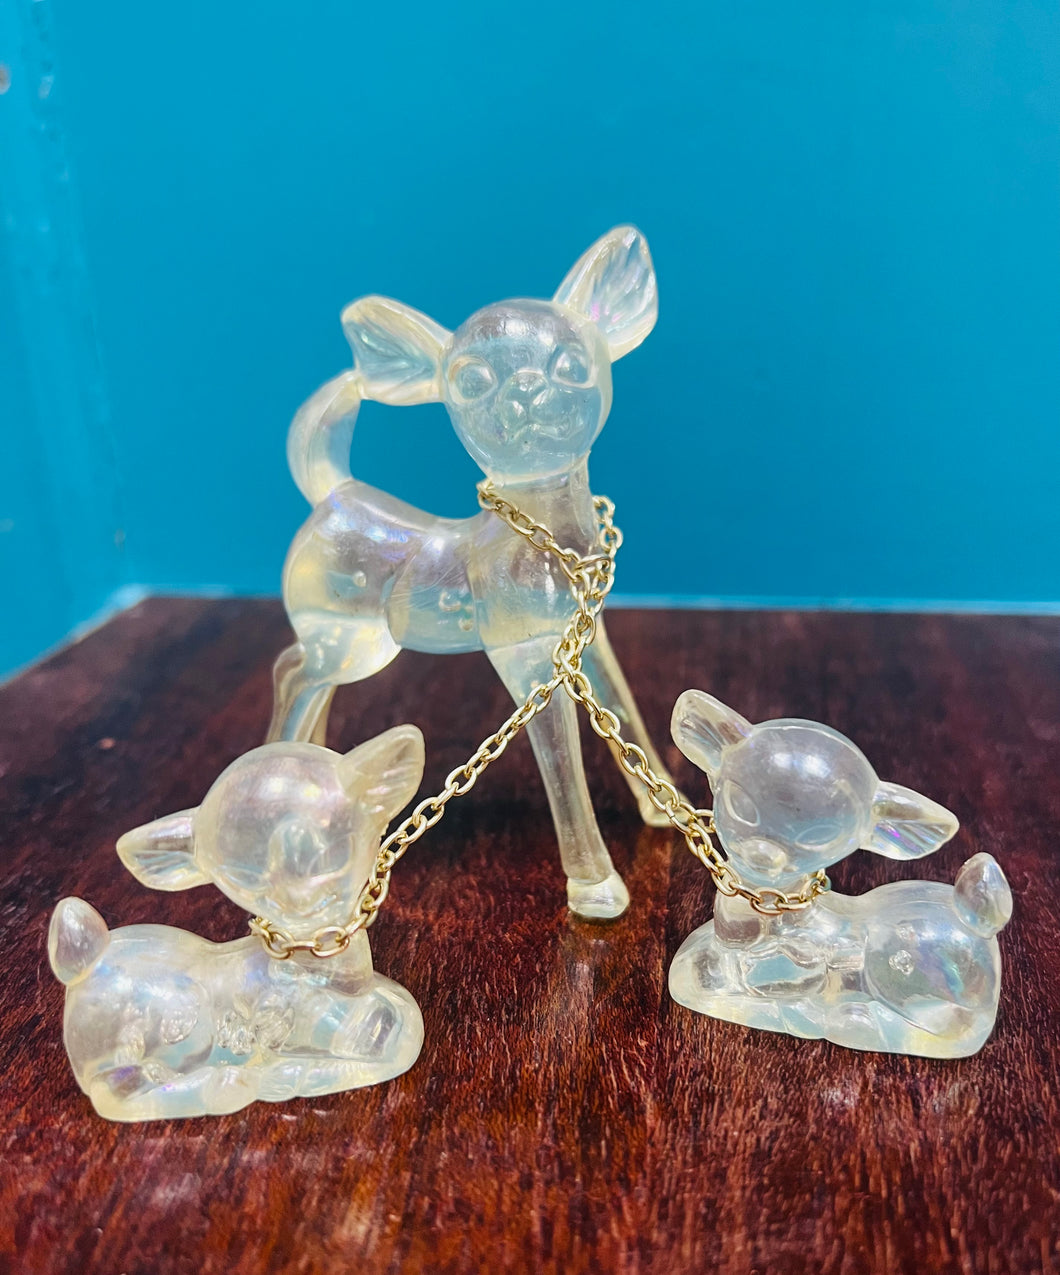 Carw a babis Lucite clir Vintage Kitsch mewn cadwyni o’r 60au / Vintage Kitsch clear Lucite Deer and babies in chain from the 60s